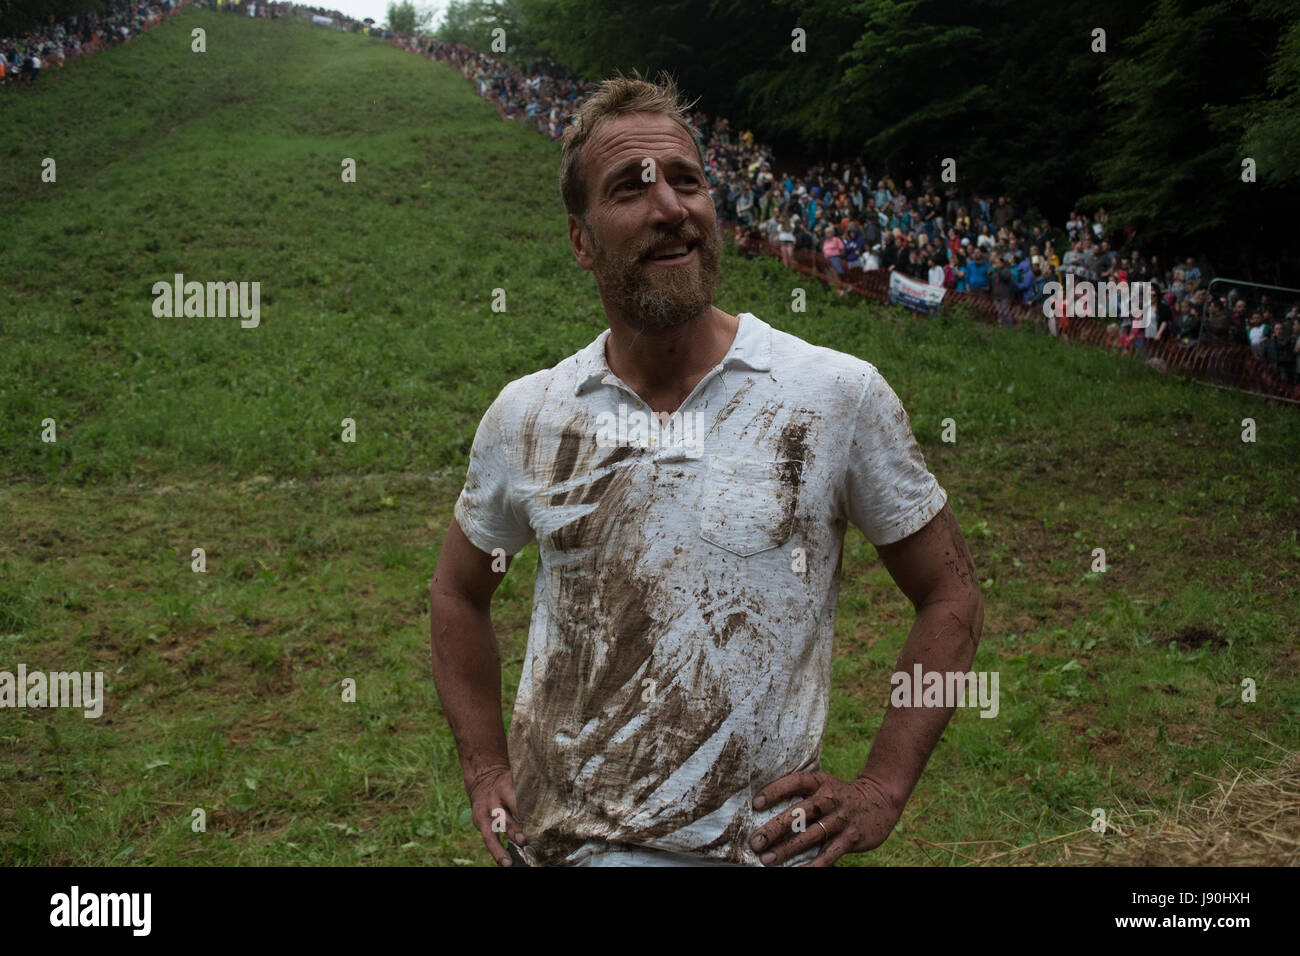 Coopers Hill, Gloucestershire, UK. 28th May, 2017. Coopers Hill Gloucestershire. Annual Cheese Rolling Festival. Author & broadcaster Ben Fogle flew in from Canada to compete and he successfully completed the run. Credit: charlie bryan/Alamy Live News Stock Photo